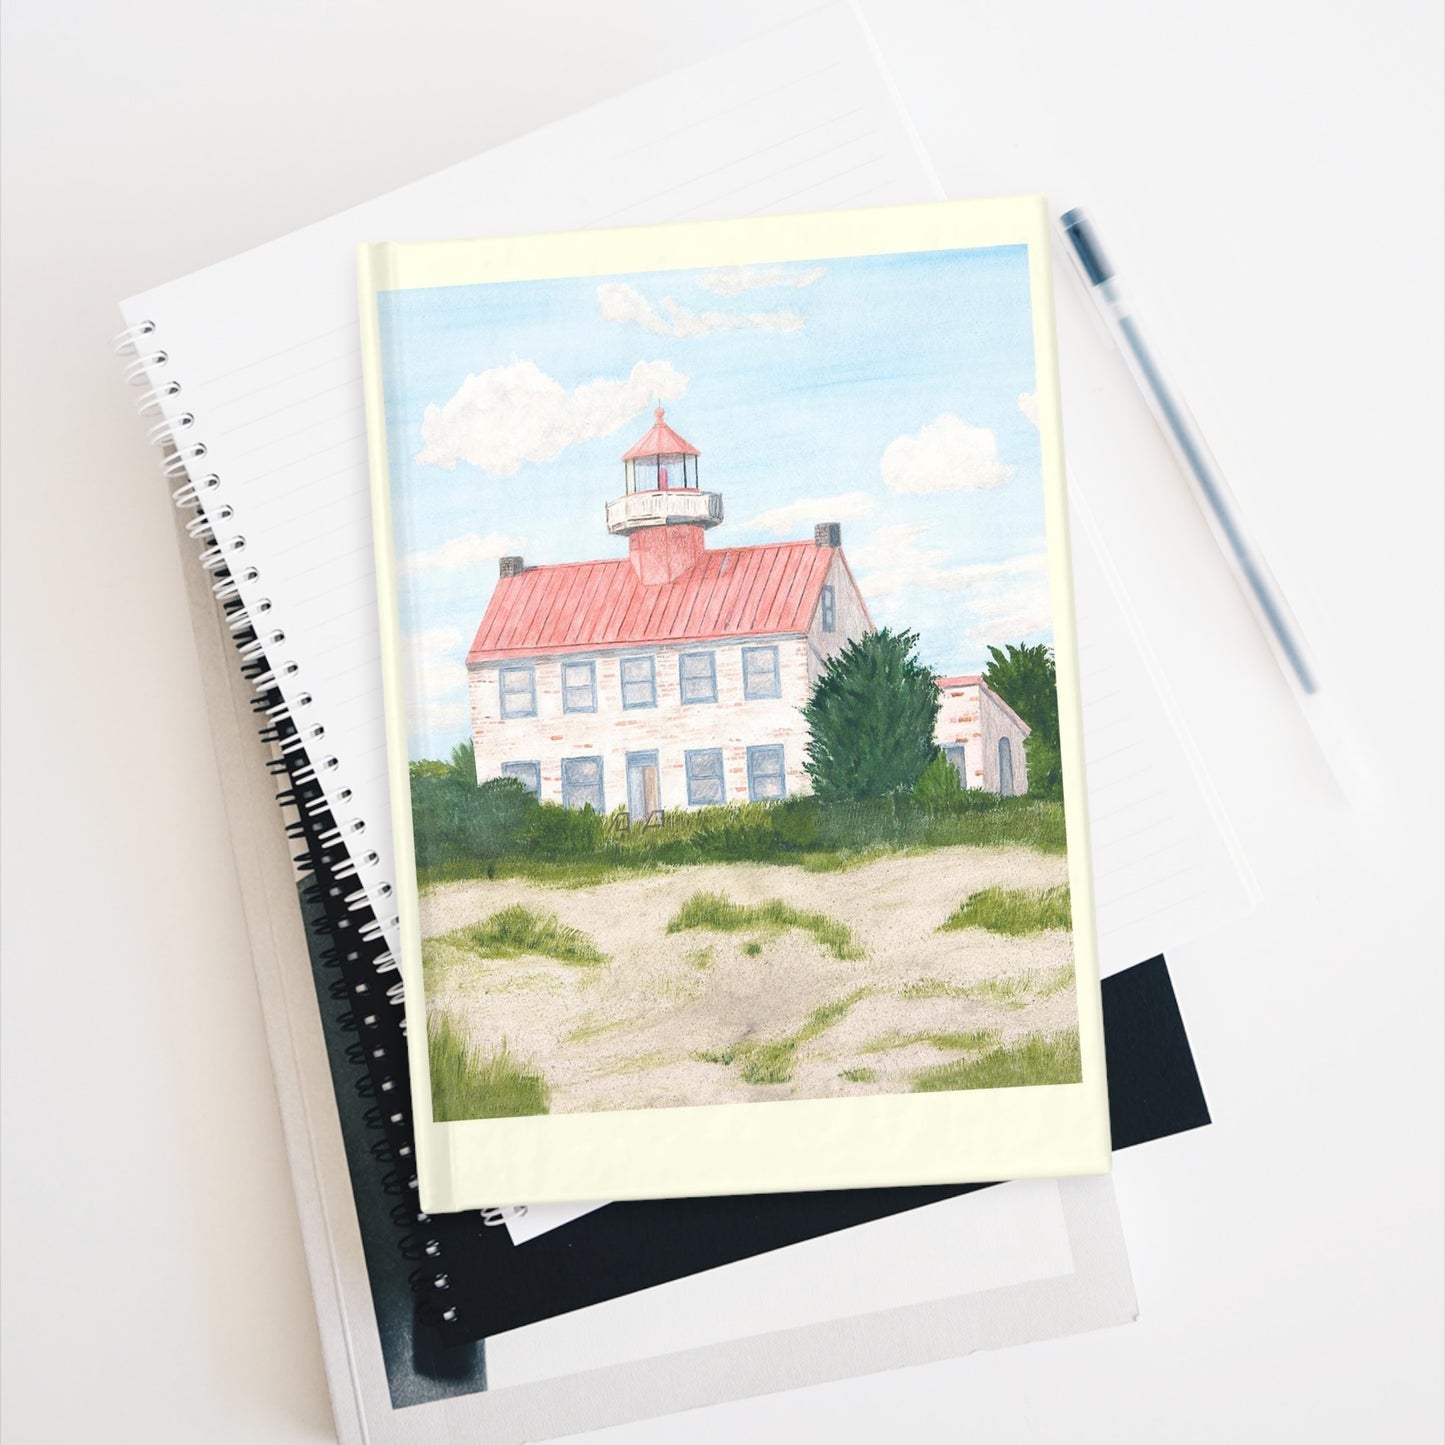 Fair Weather Off East Point Light Lined Page Journal